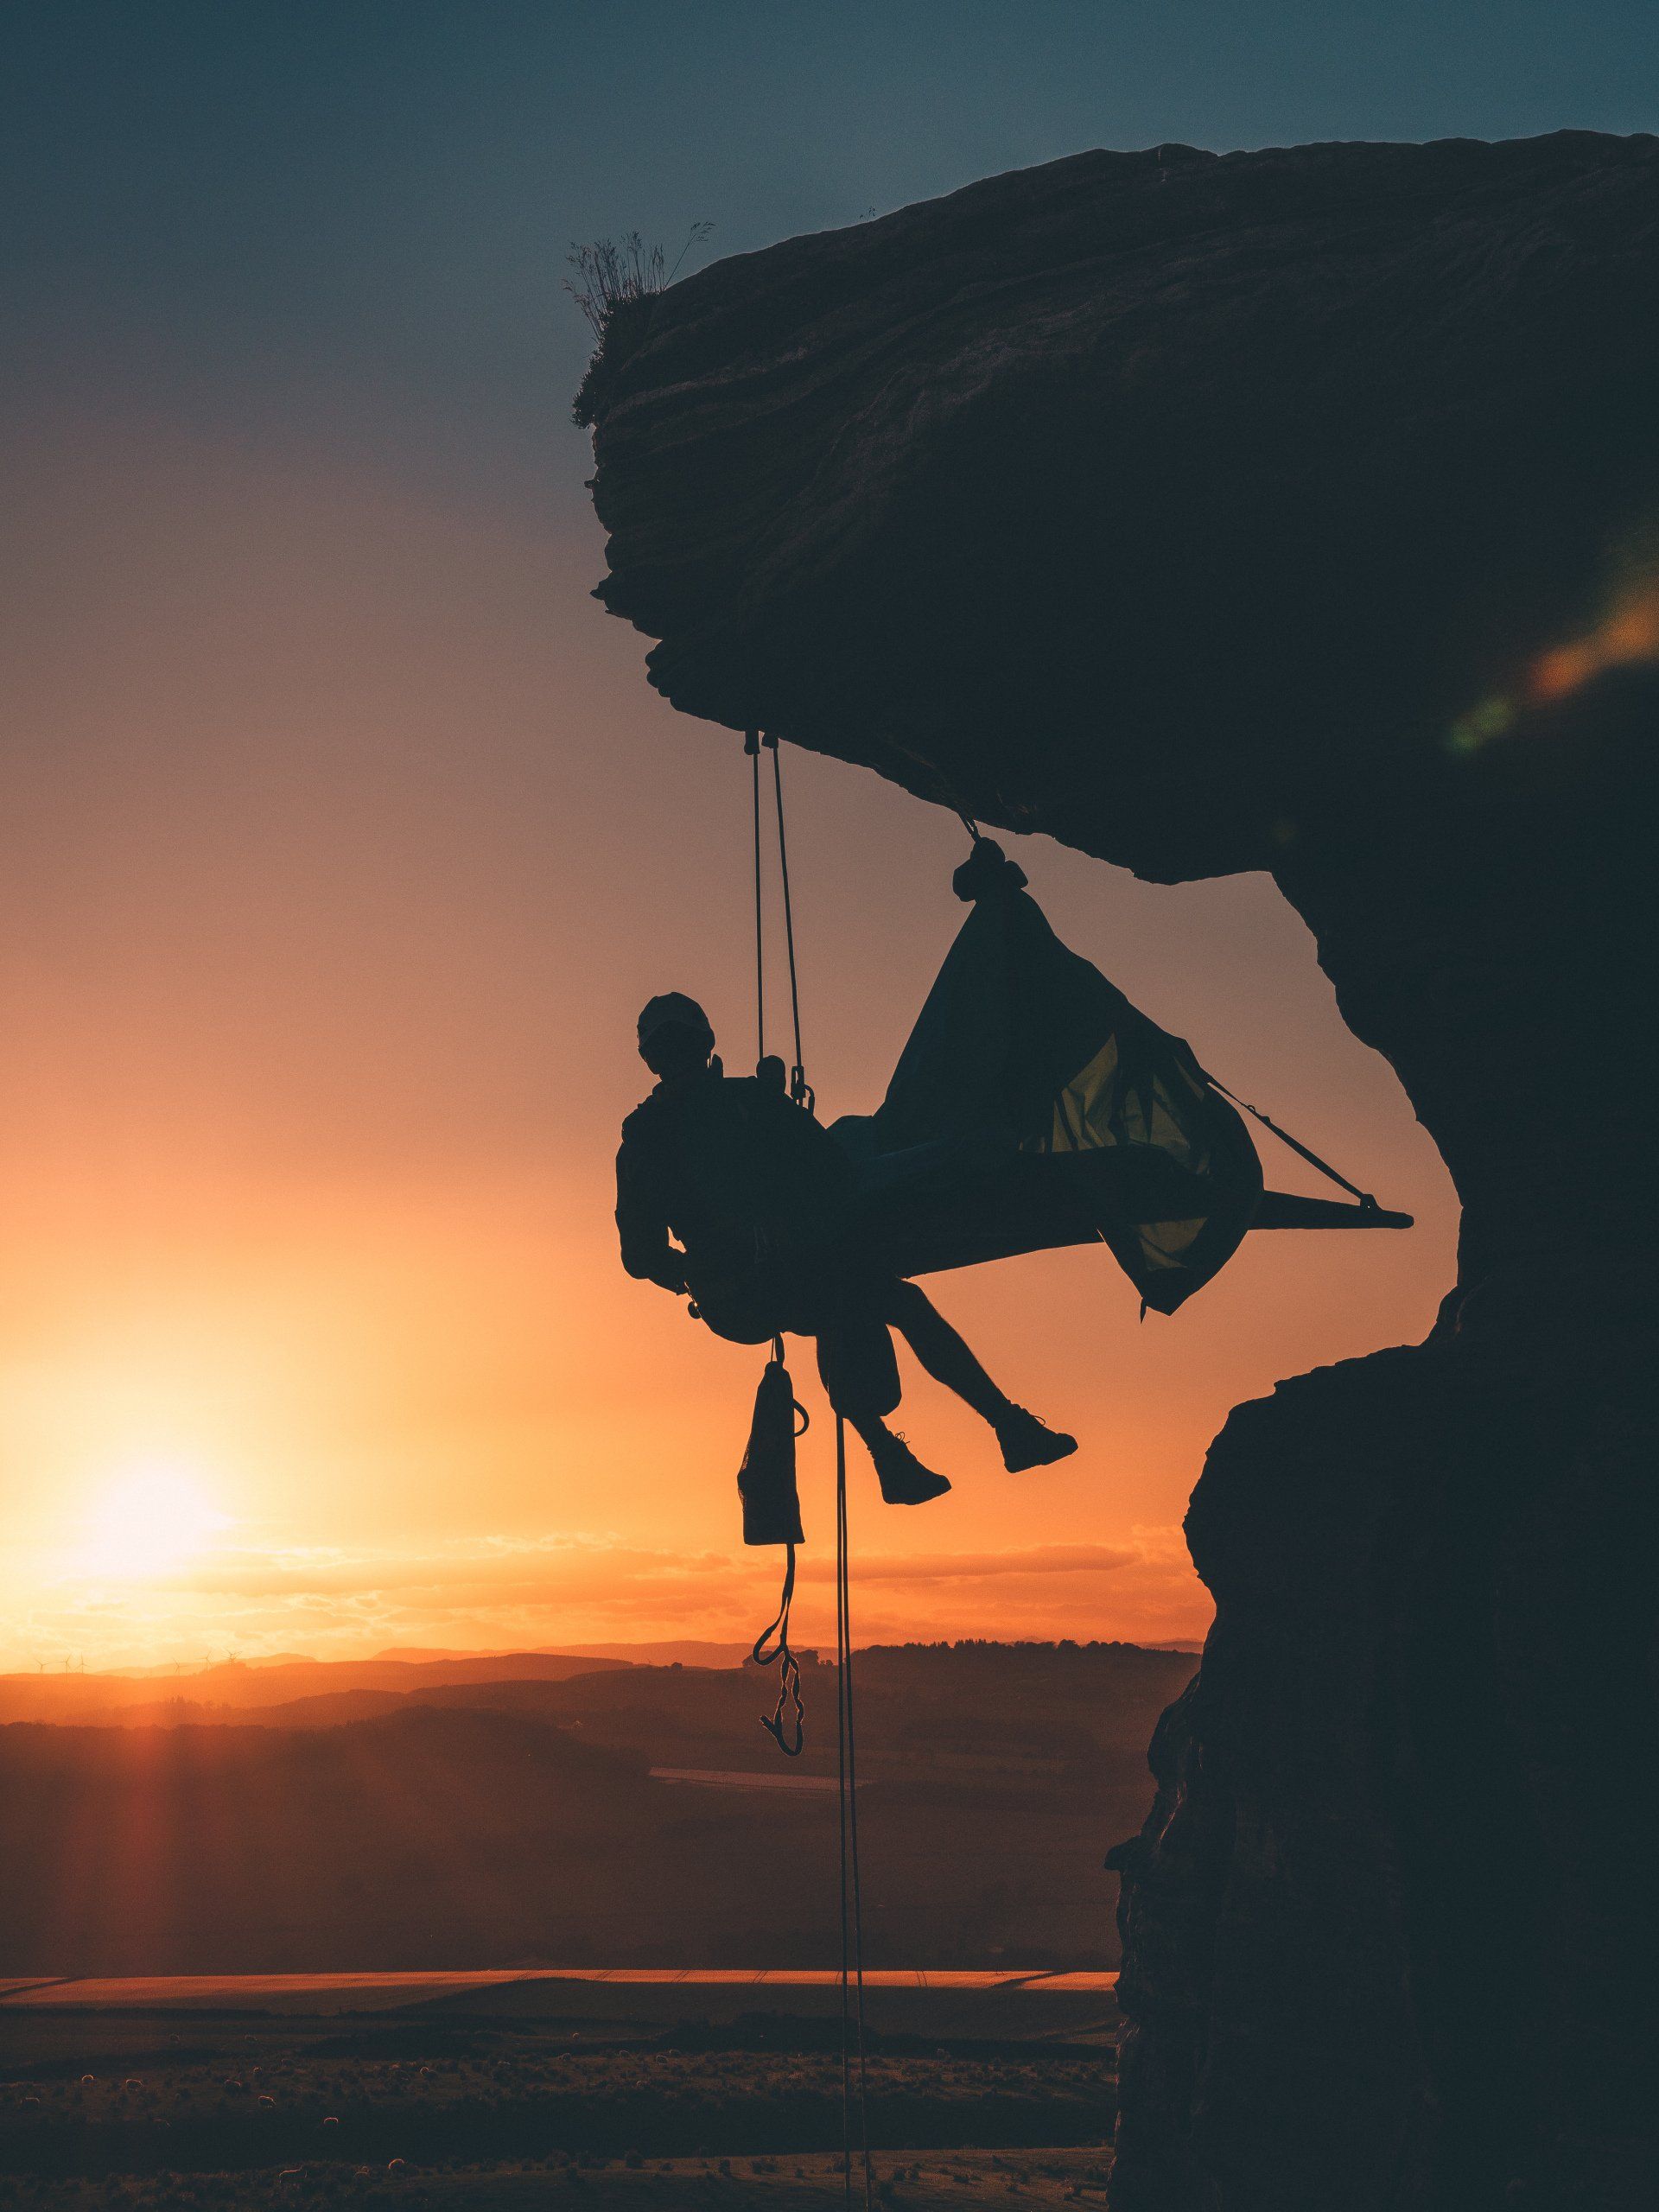 a person is sitting in a tent on a cliff at sunset with a rescue worker using ropes t access.